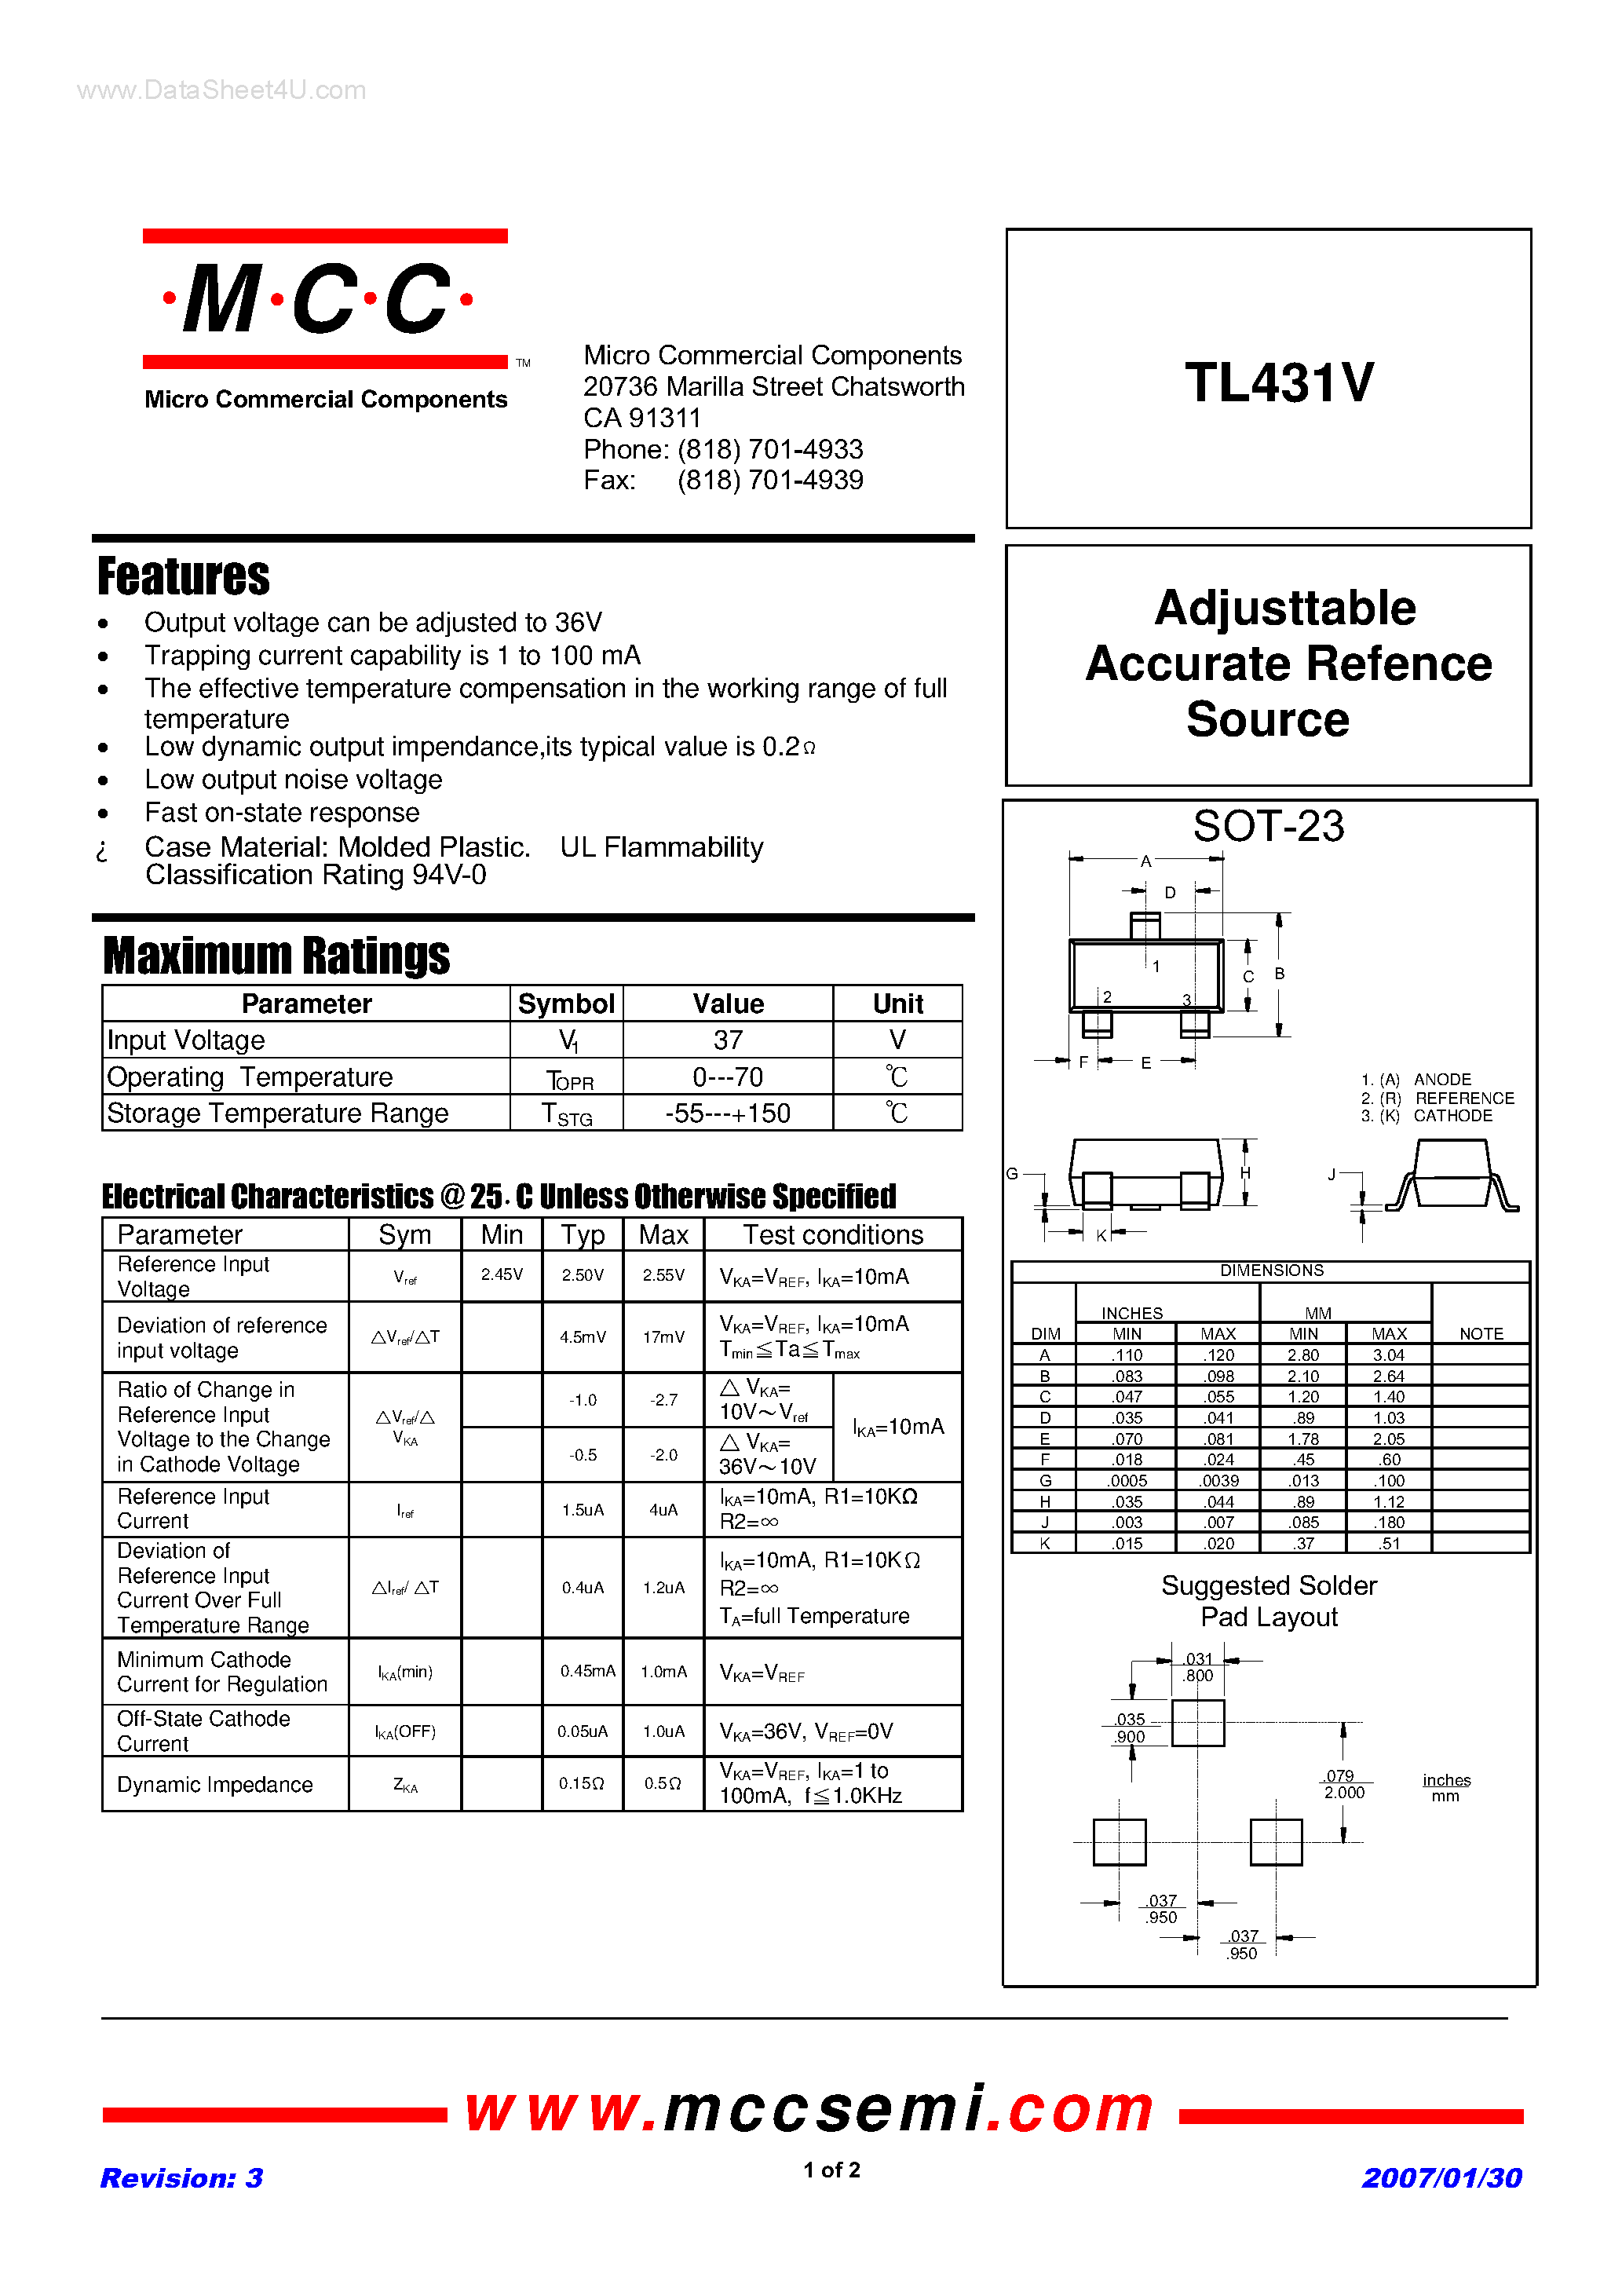 Datasheet TL431V - Adjusttable Accurate Refence Source page 1